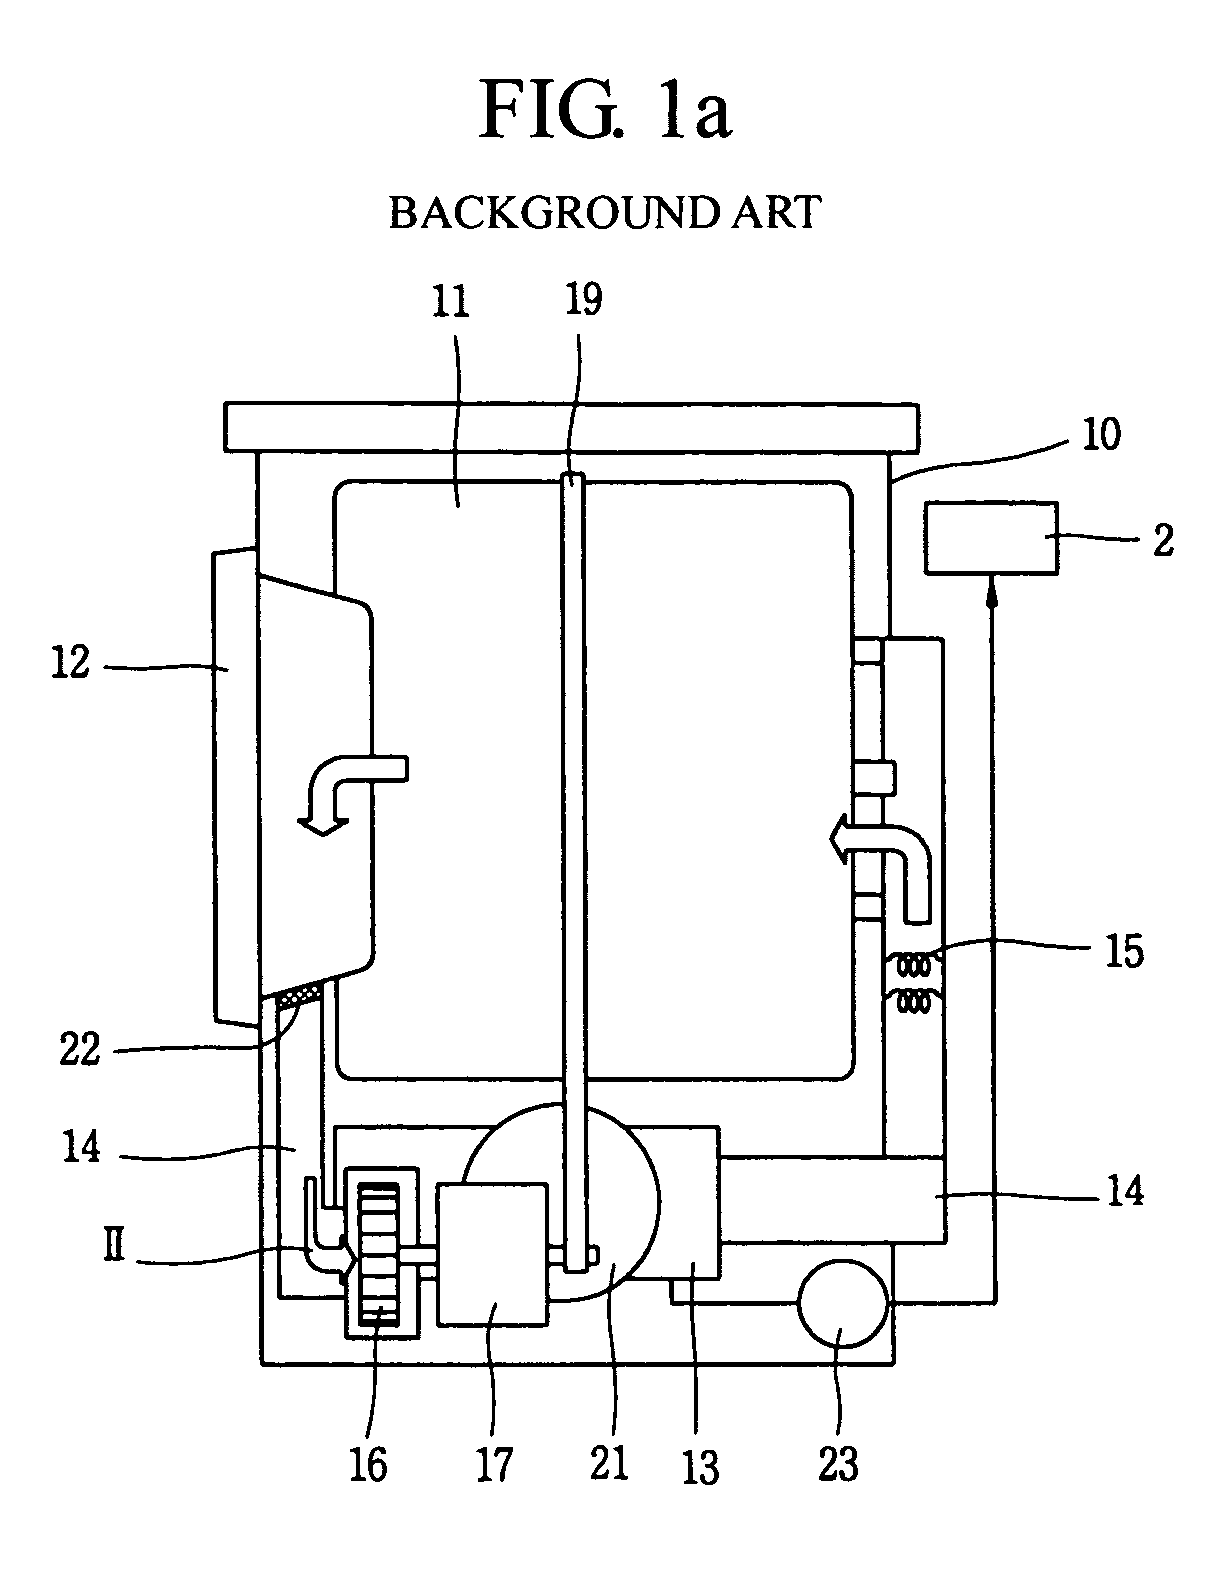 Heat exchanger for dryer and condensing type dryer using the same